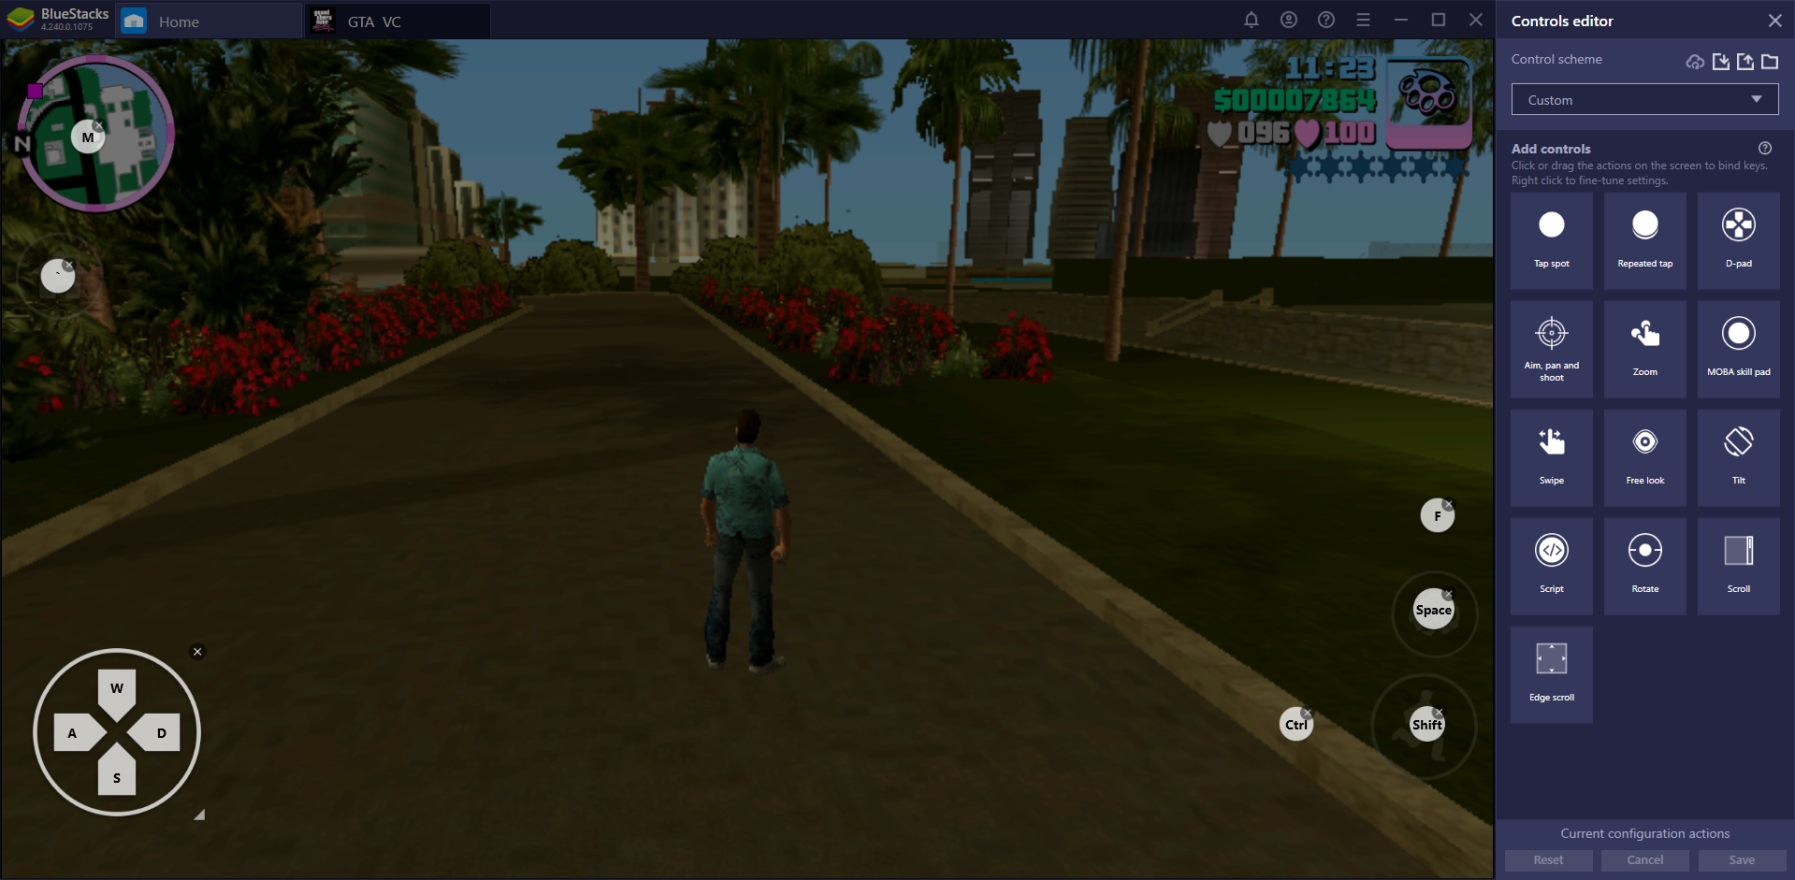 How to Download GTA Vice City Game in Laptop